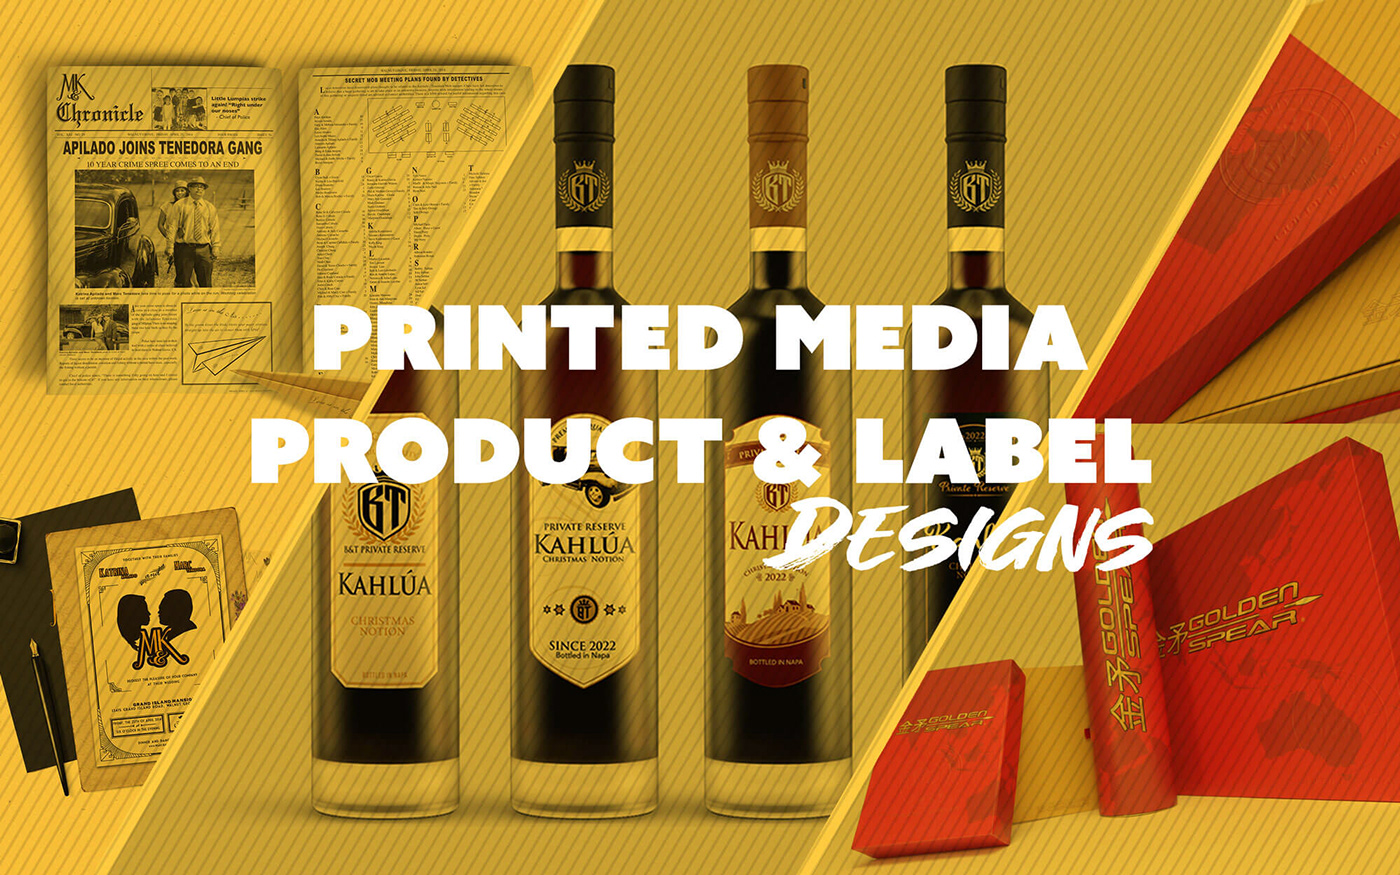 A thumbnail design of product and label designs by Marc Tenedora of Mac Ten Designs